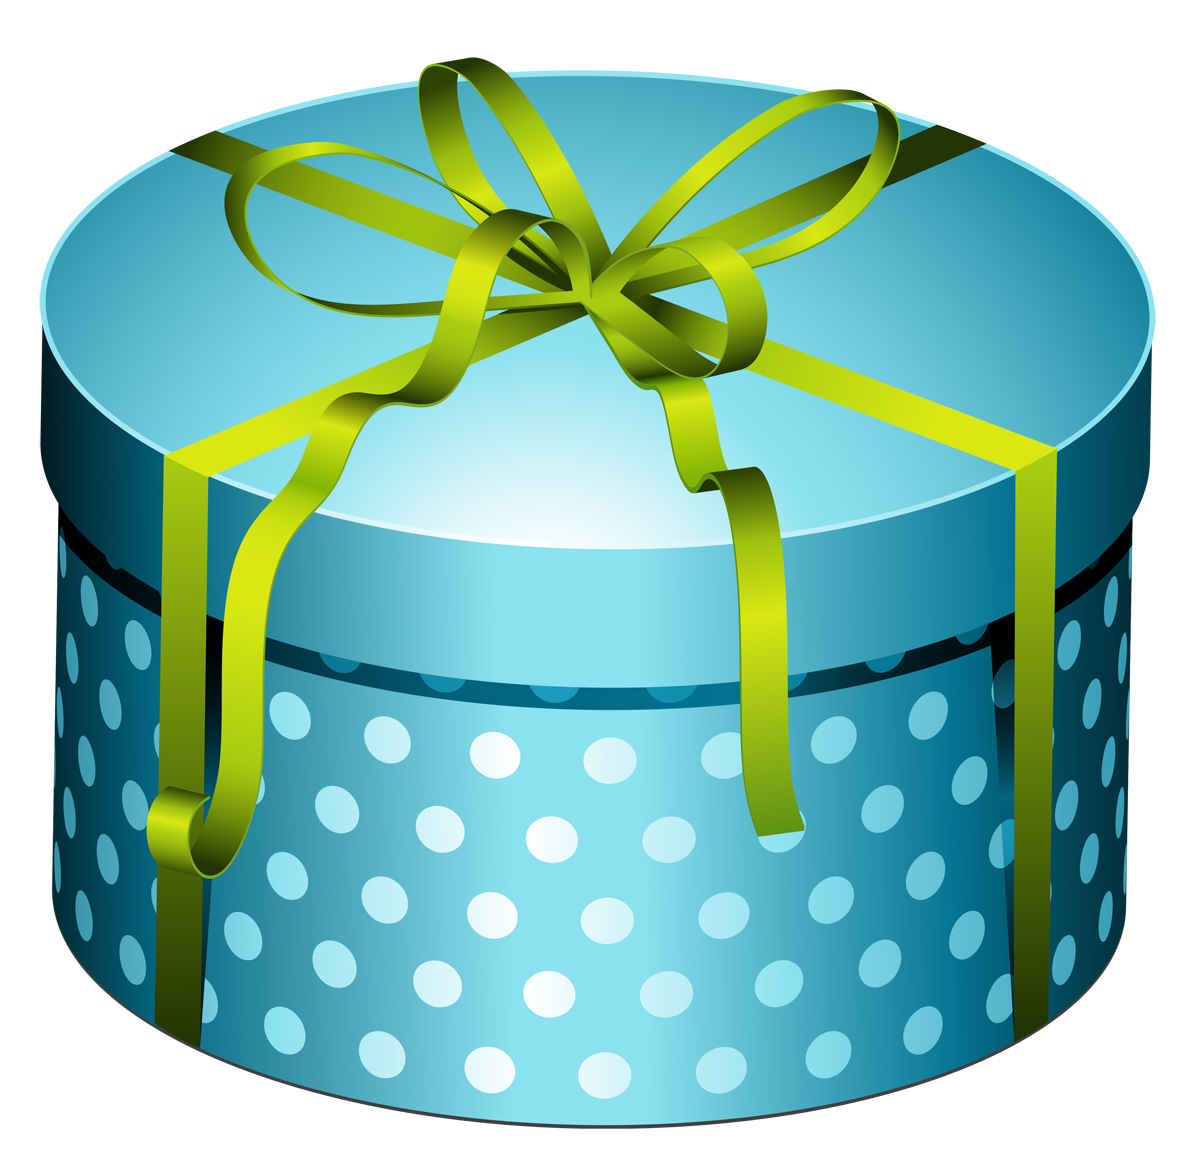 Blue Round Present Box with Bow PNG Clipart.